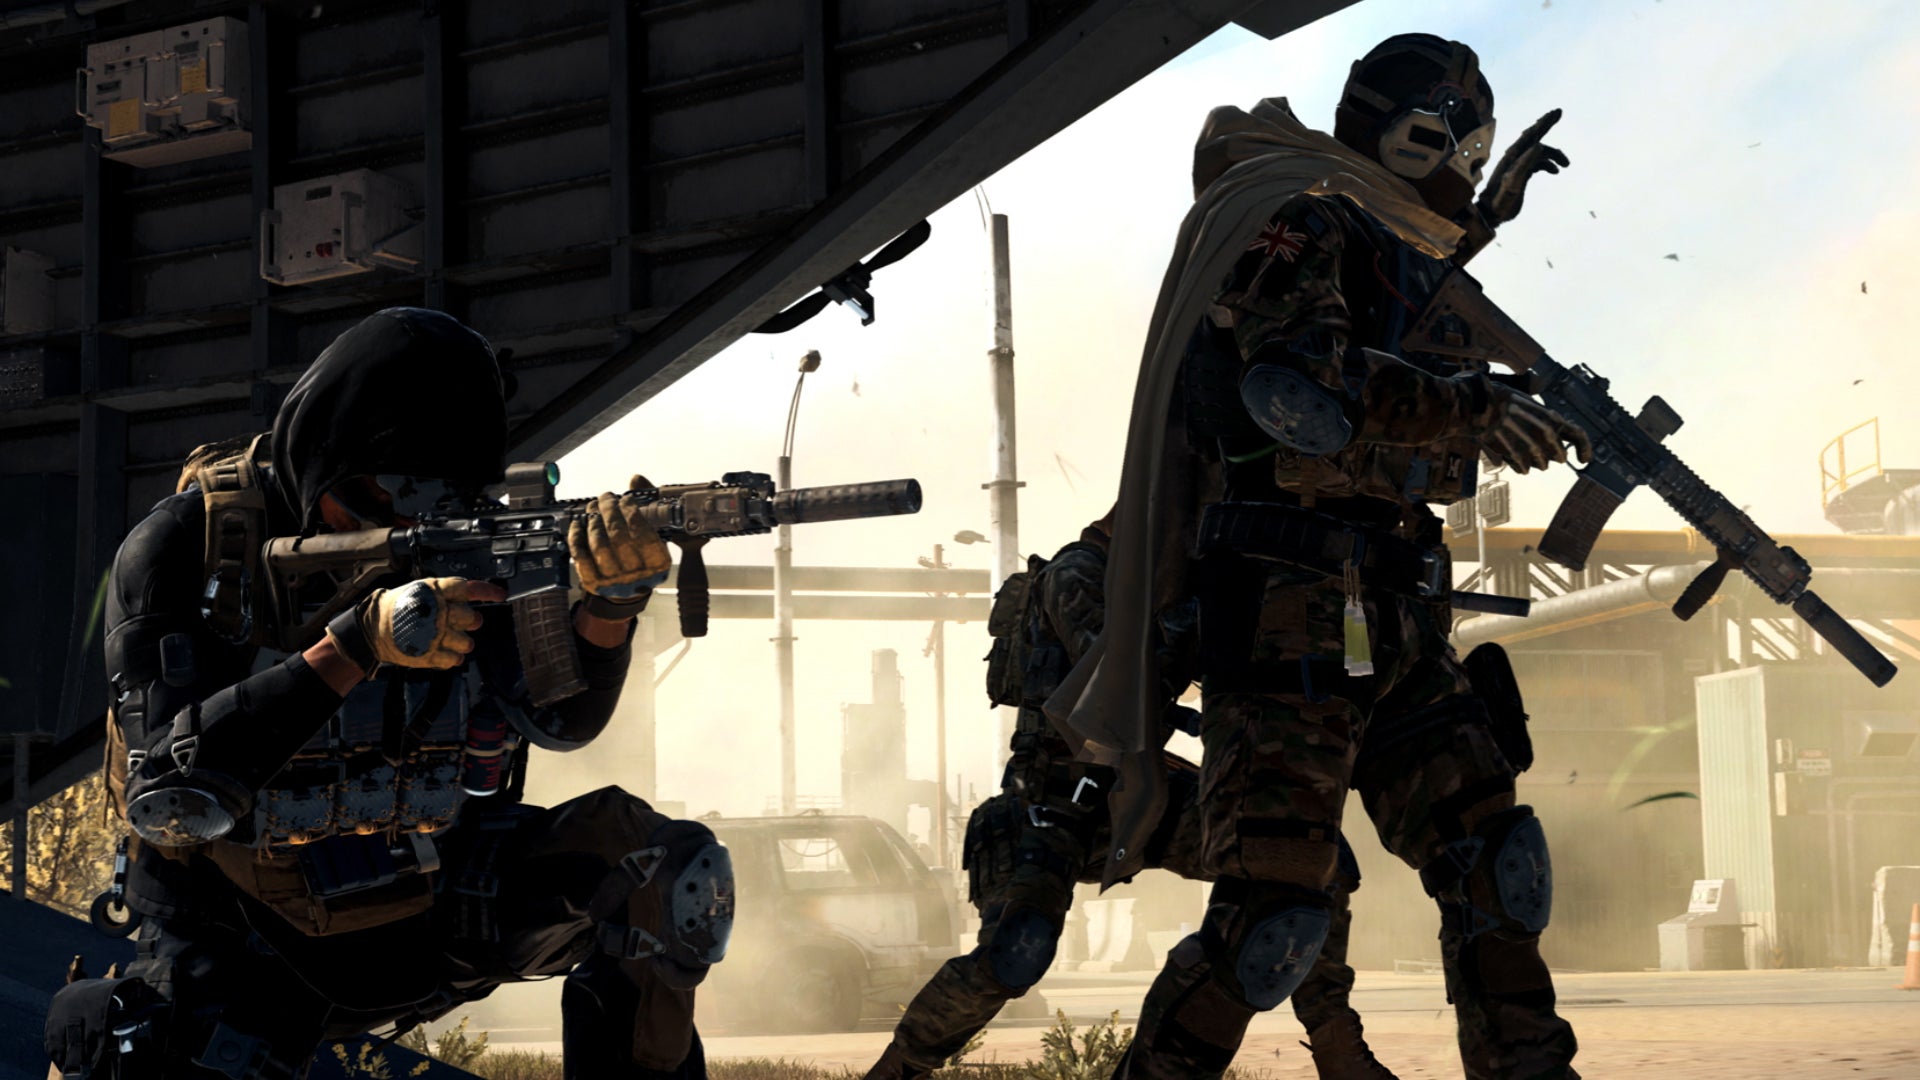 A three-person squad exits their aircraft with weapons drawn in Warzone 2.0.